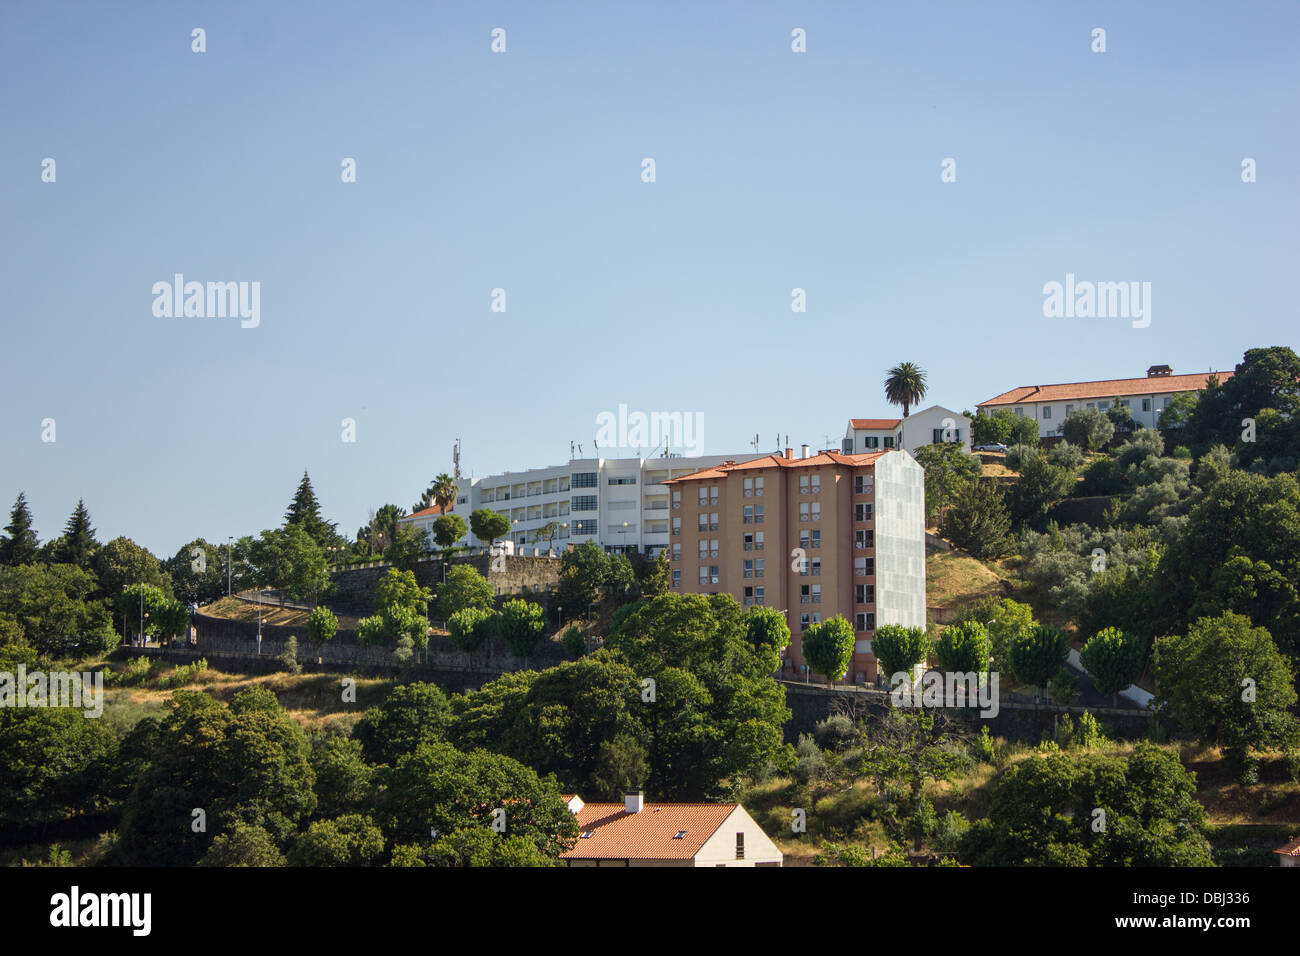 University residences for students in Covilhã Stock Photo